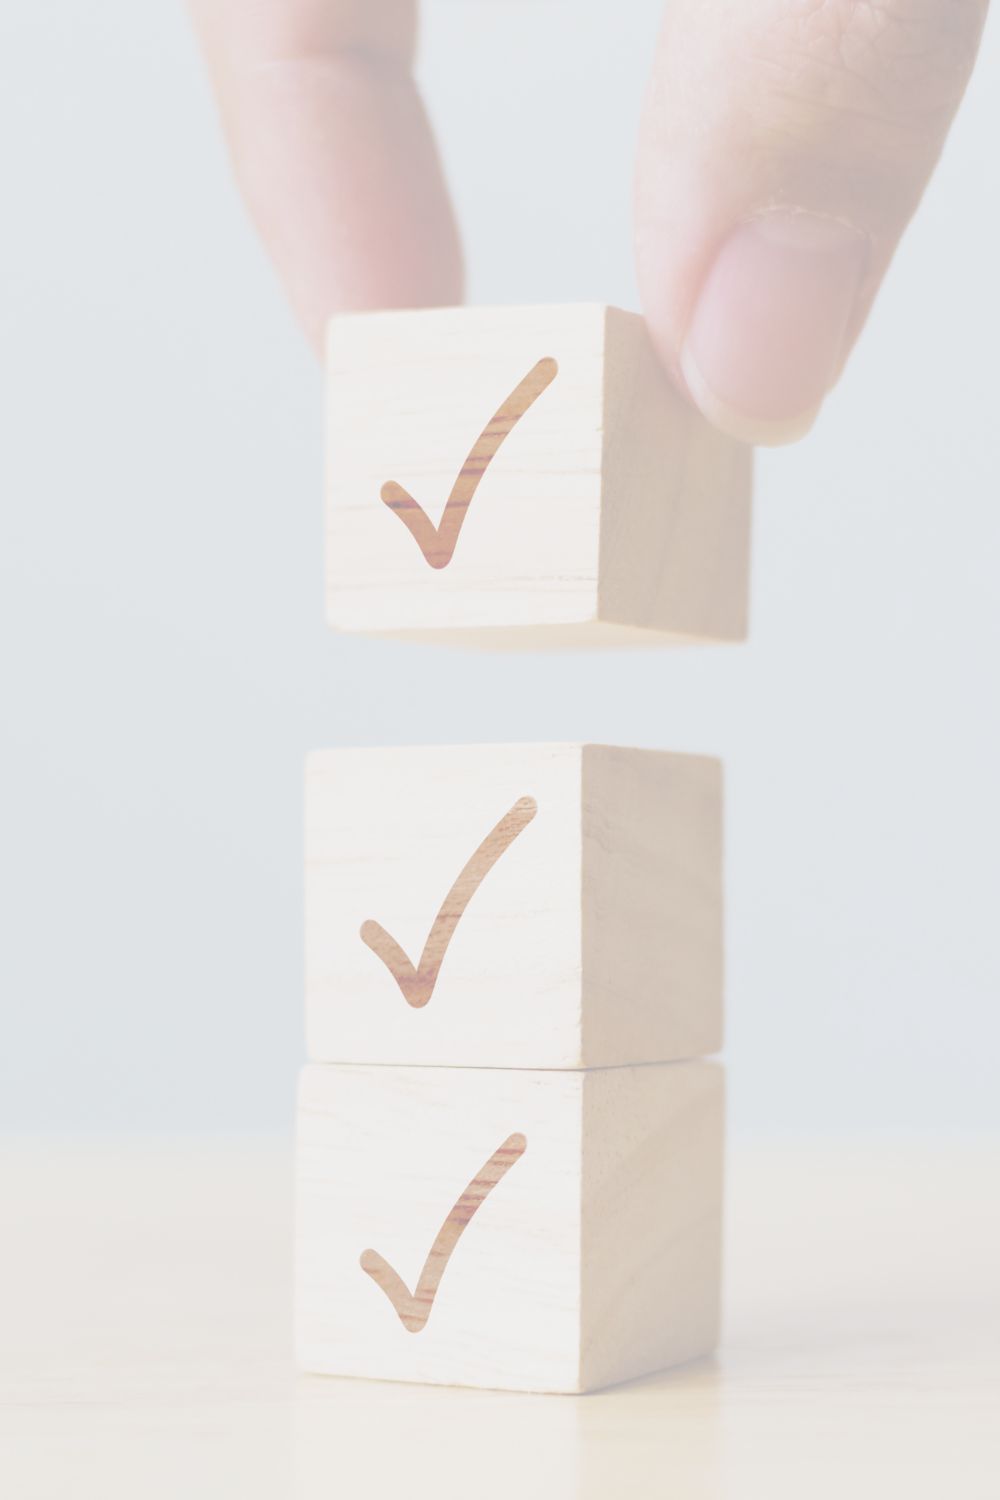 Two wooden cubes each with a check mark are stacked on top of each other. A third identical cube is being placed on top, held between someone's thumb and index finger.